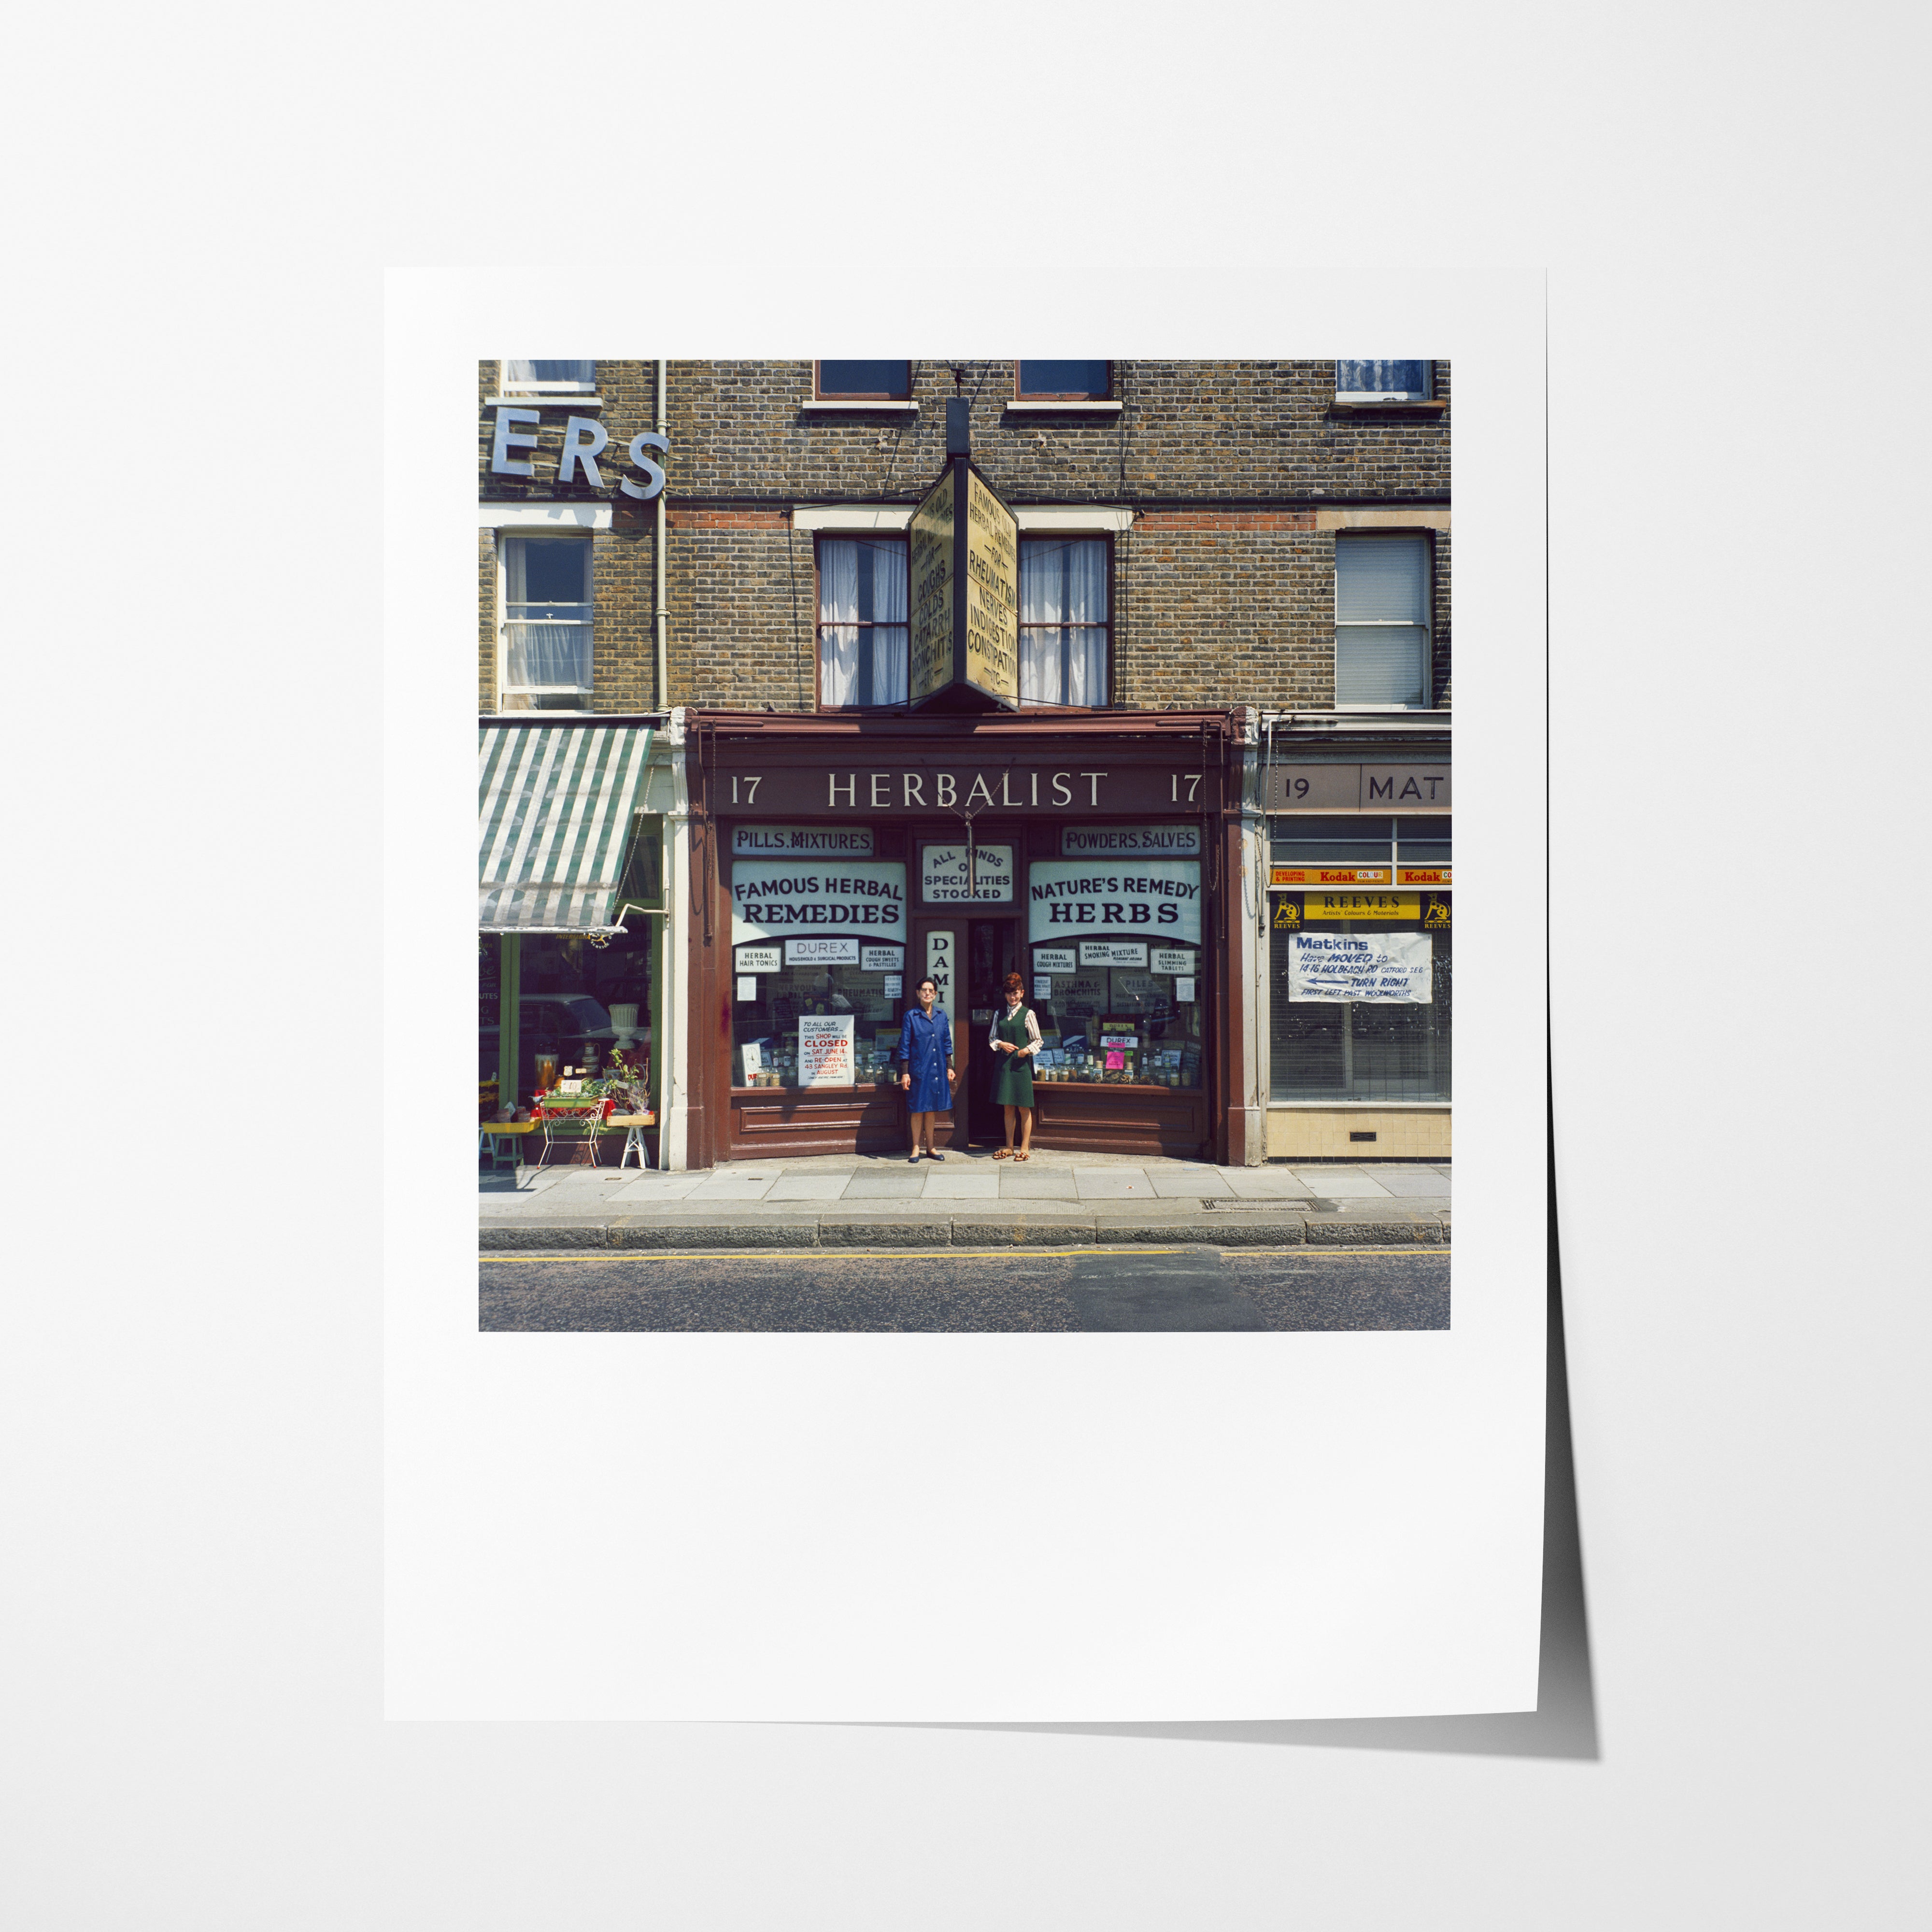 Mrs. McArthy & her daughter, Sangley Road, London, 1975 - 16x20" Pigment Print